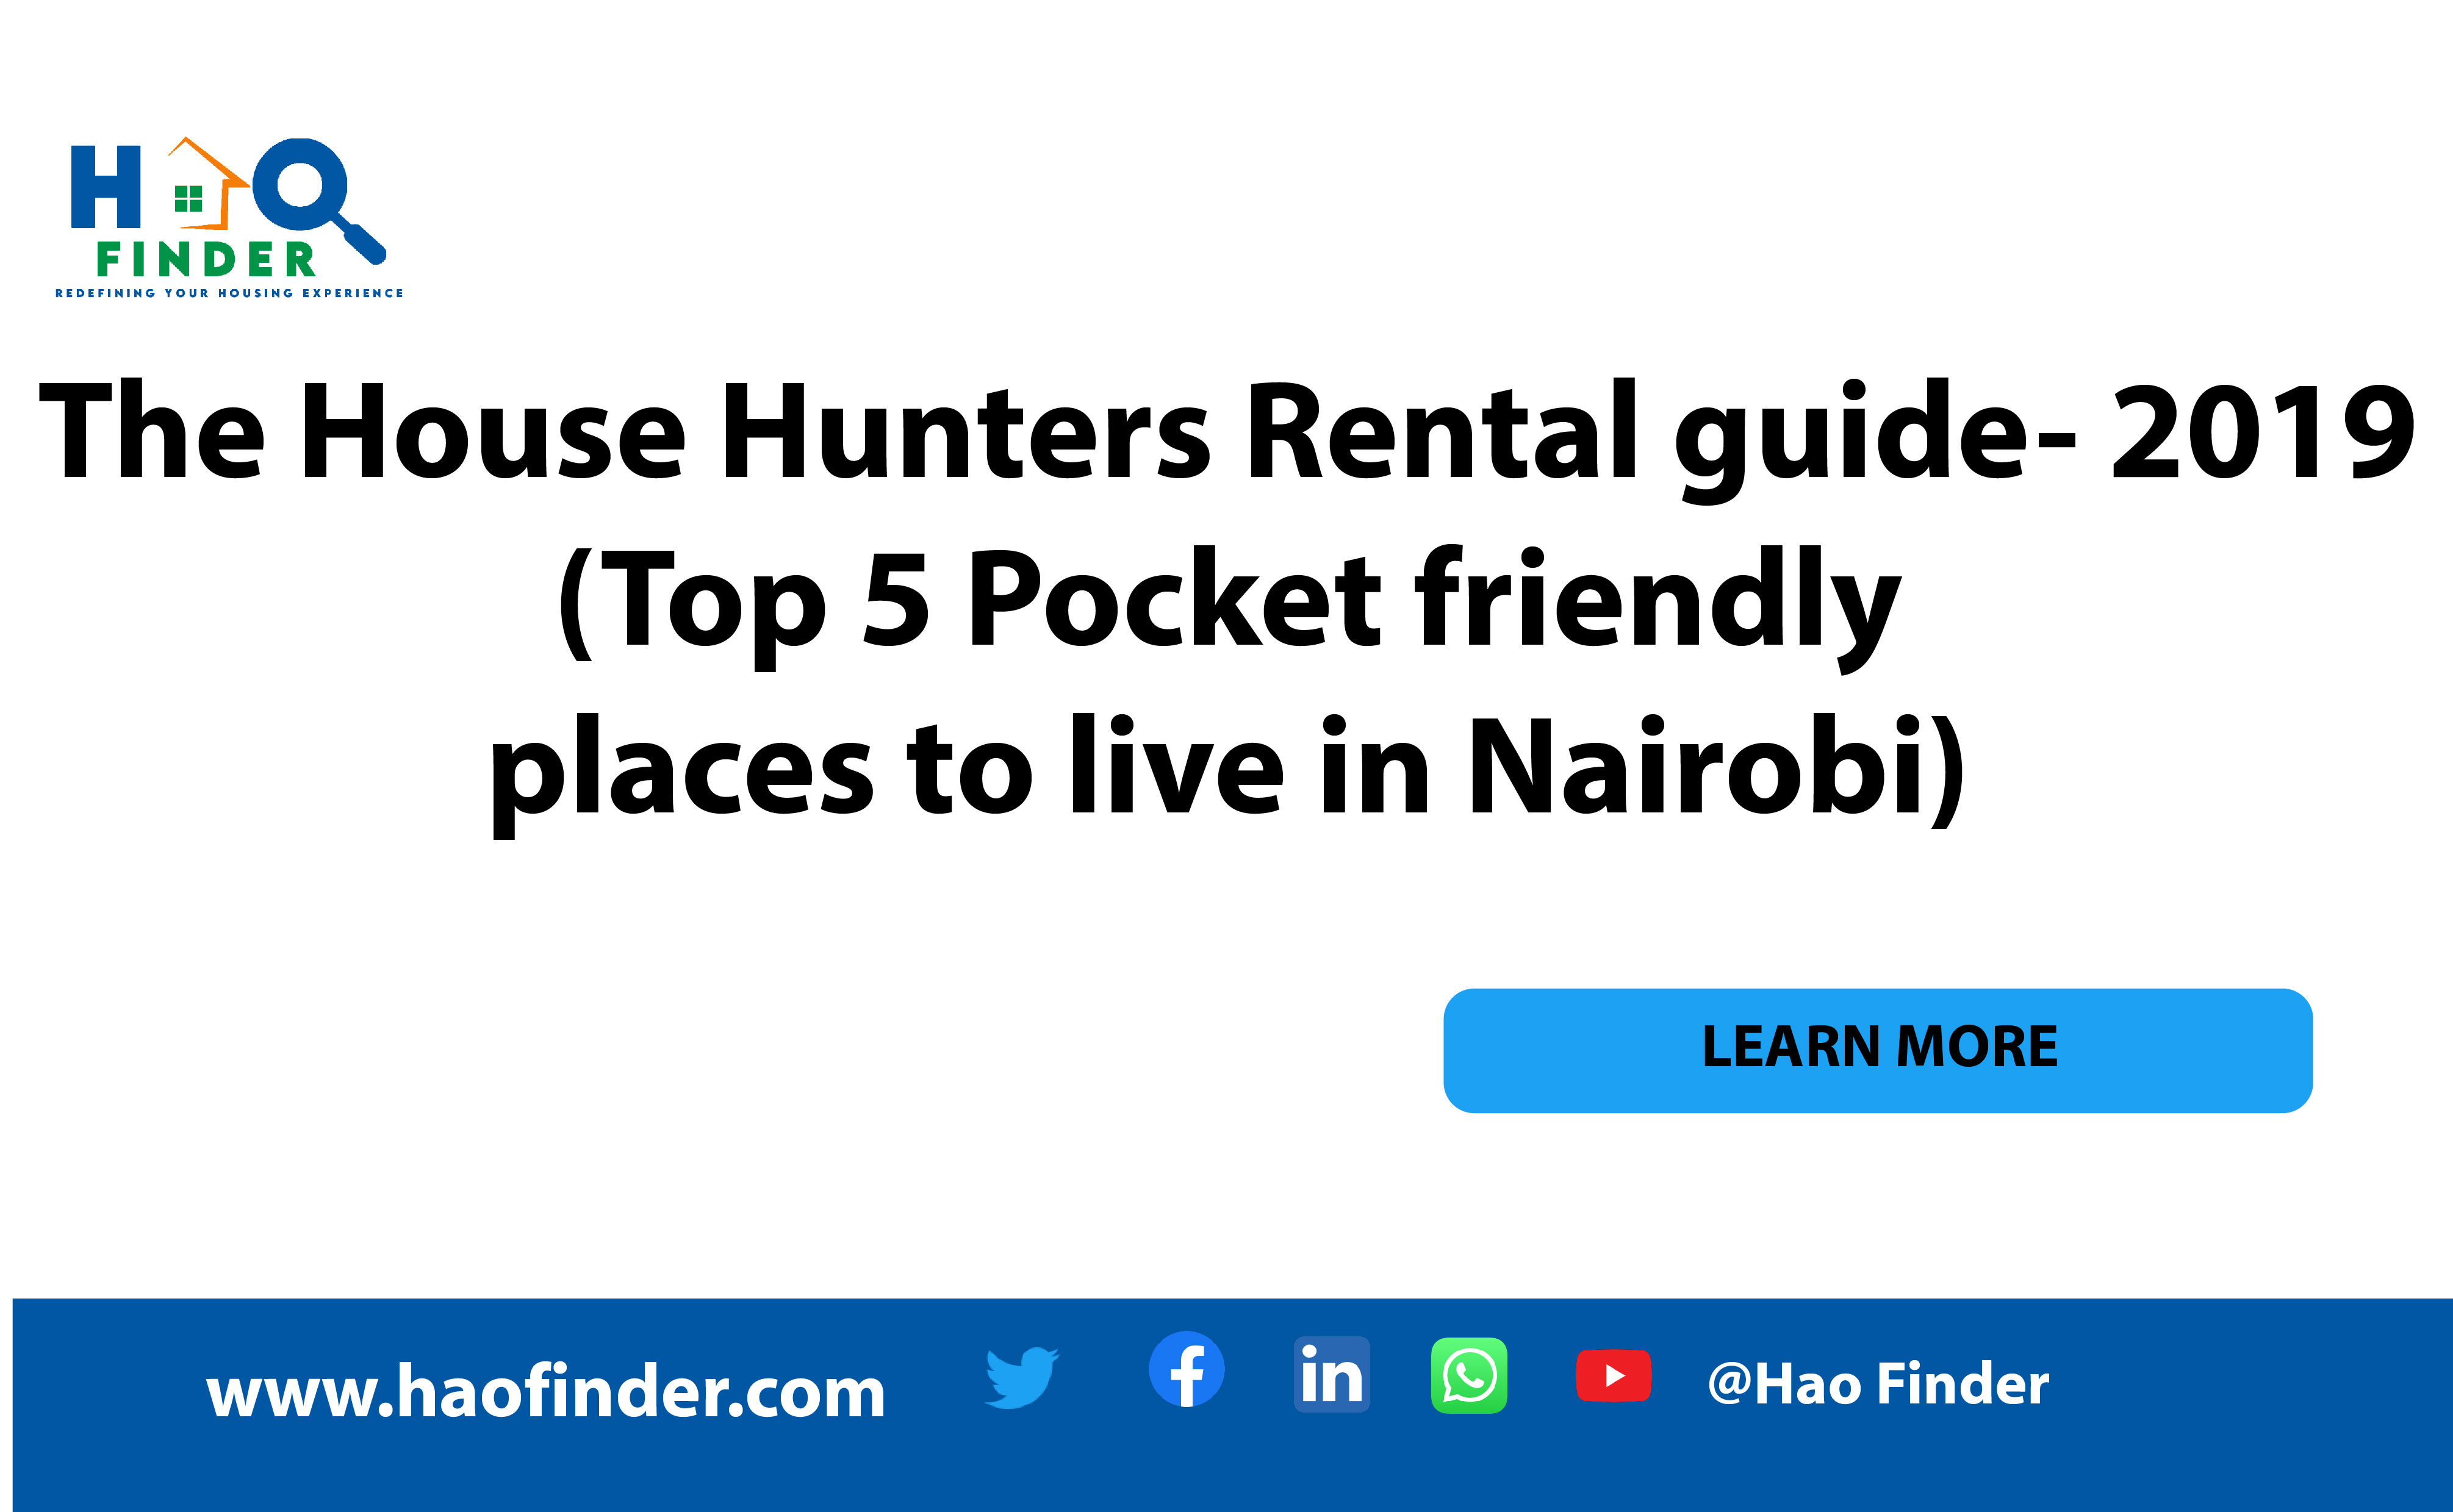 The House Hunters Rental guide- 2019 (Top 5 Pocket friendly places to live in Nairobi)